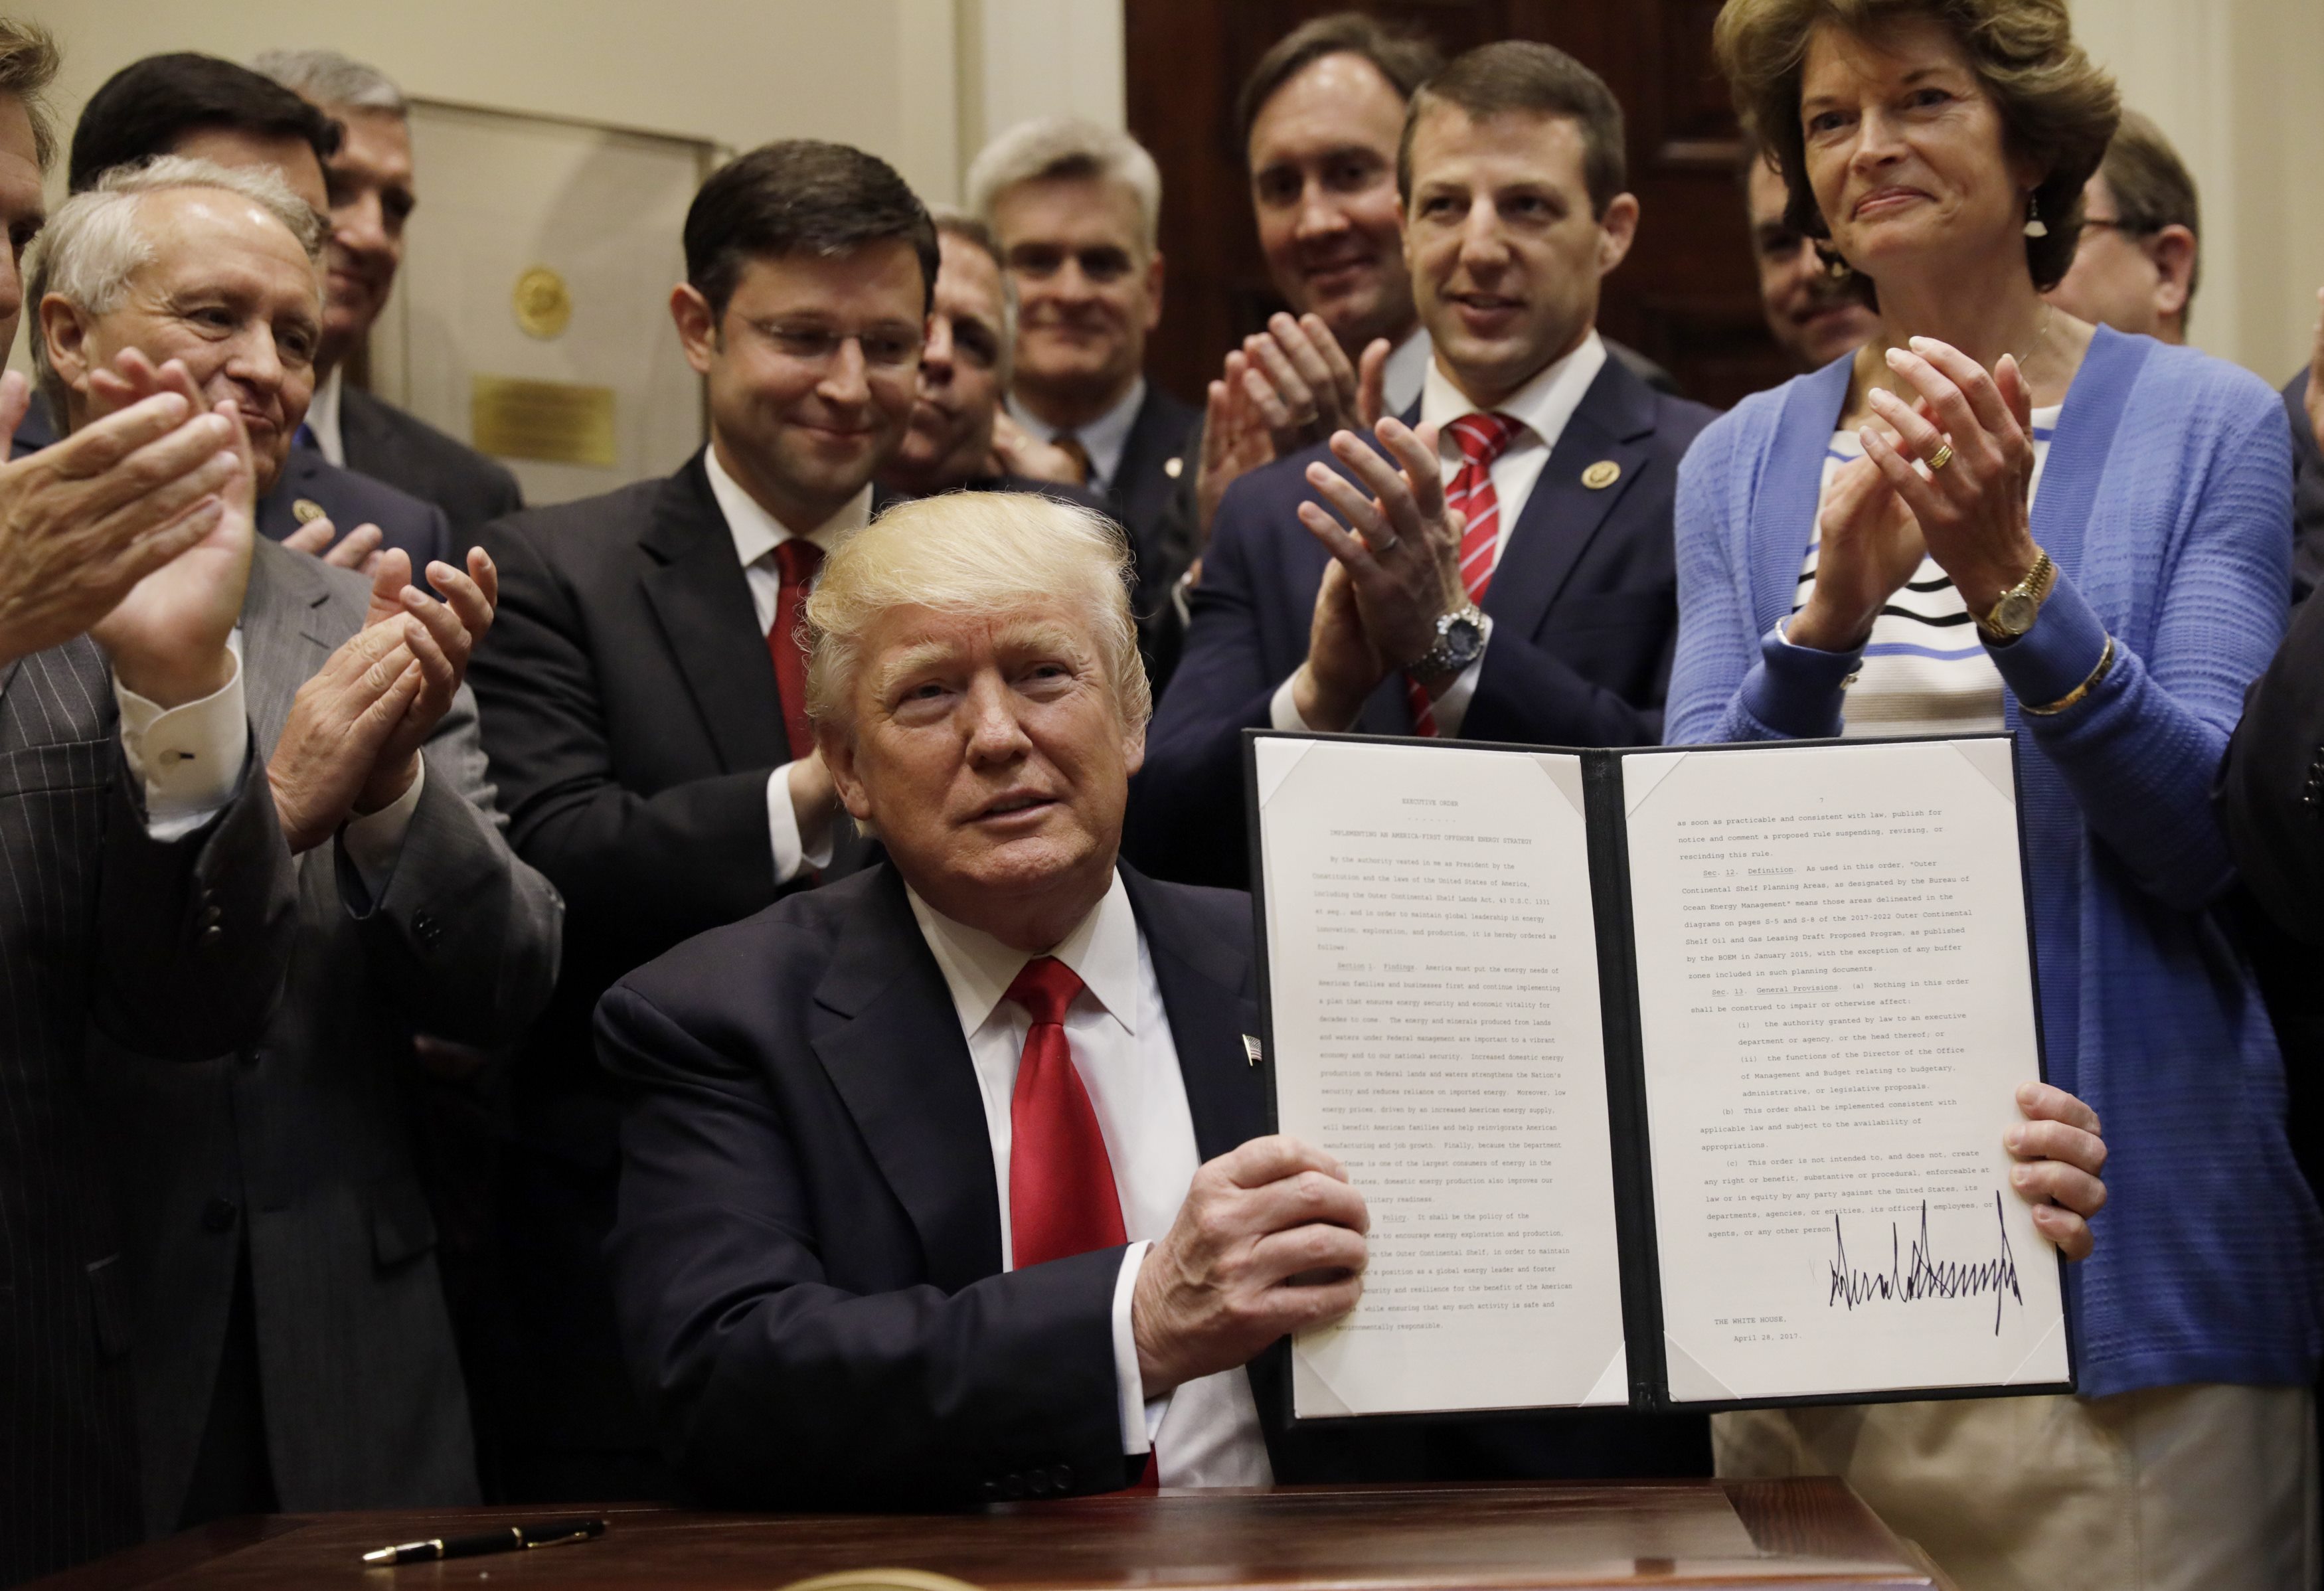 U.S. President Donald Trump displays an Executive Order on "Offshore Energy Strategy" at the White House, April 28, 2017. (Kevin Lamarque / Reuters)